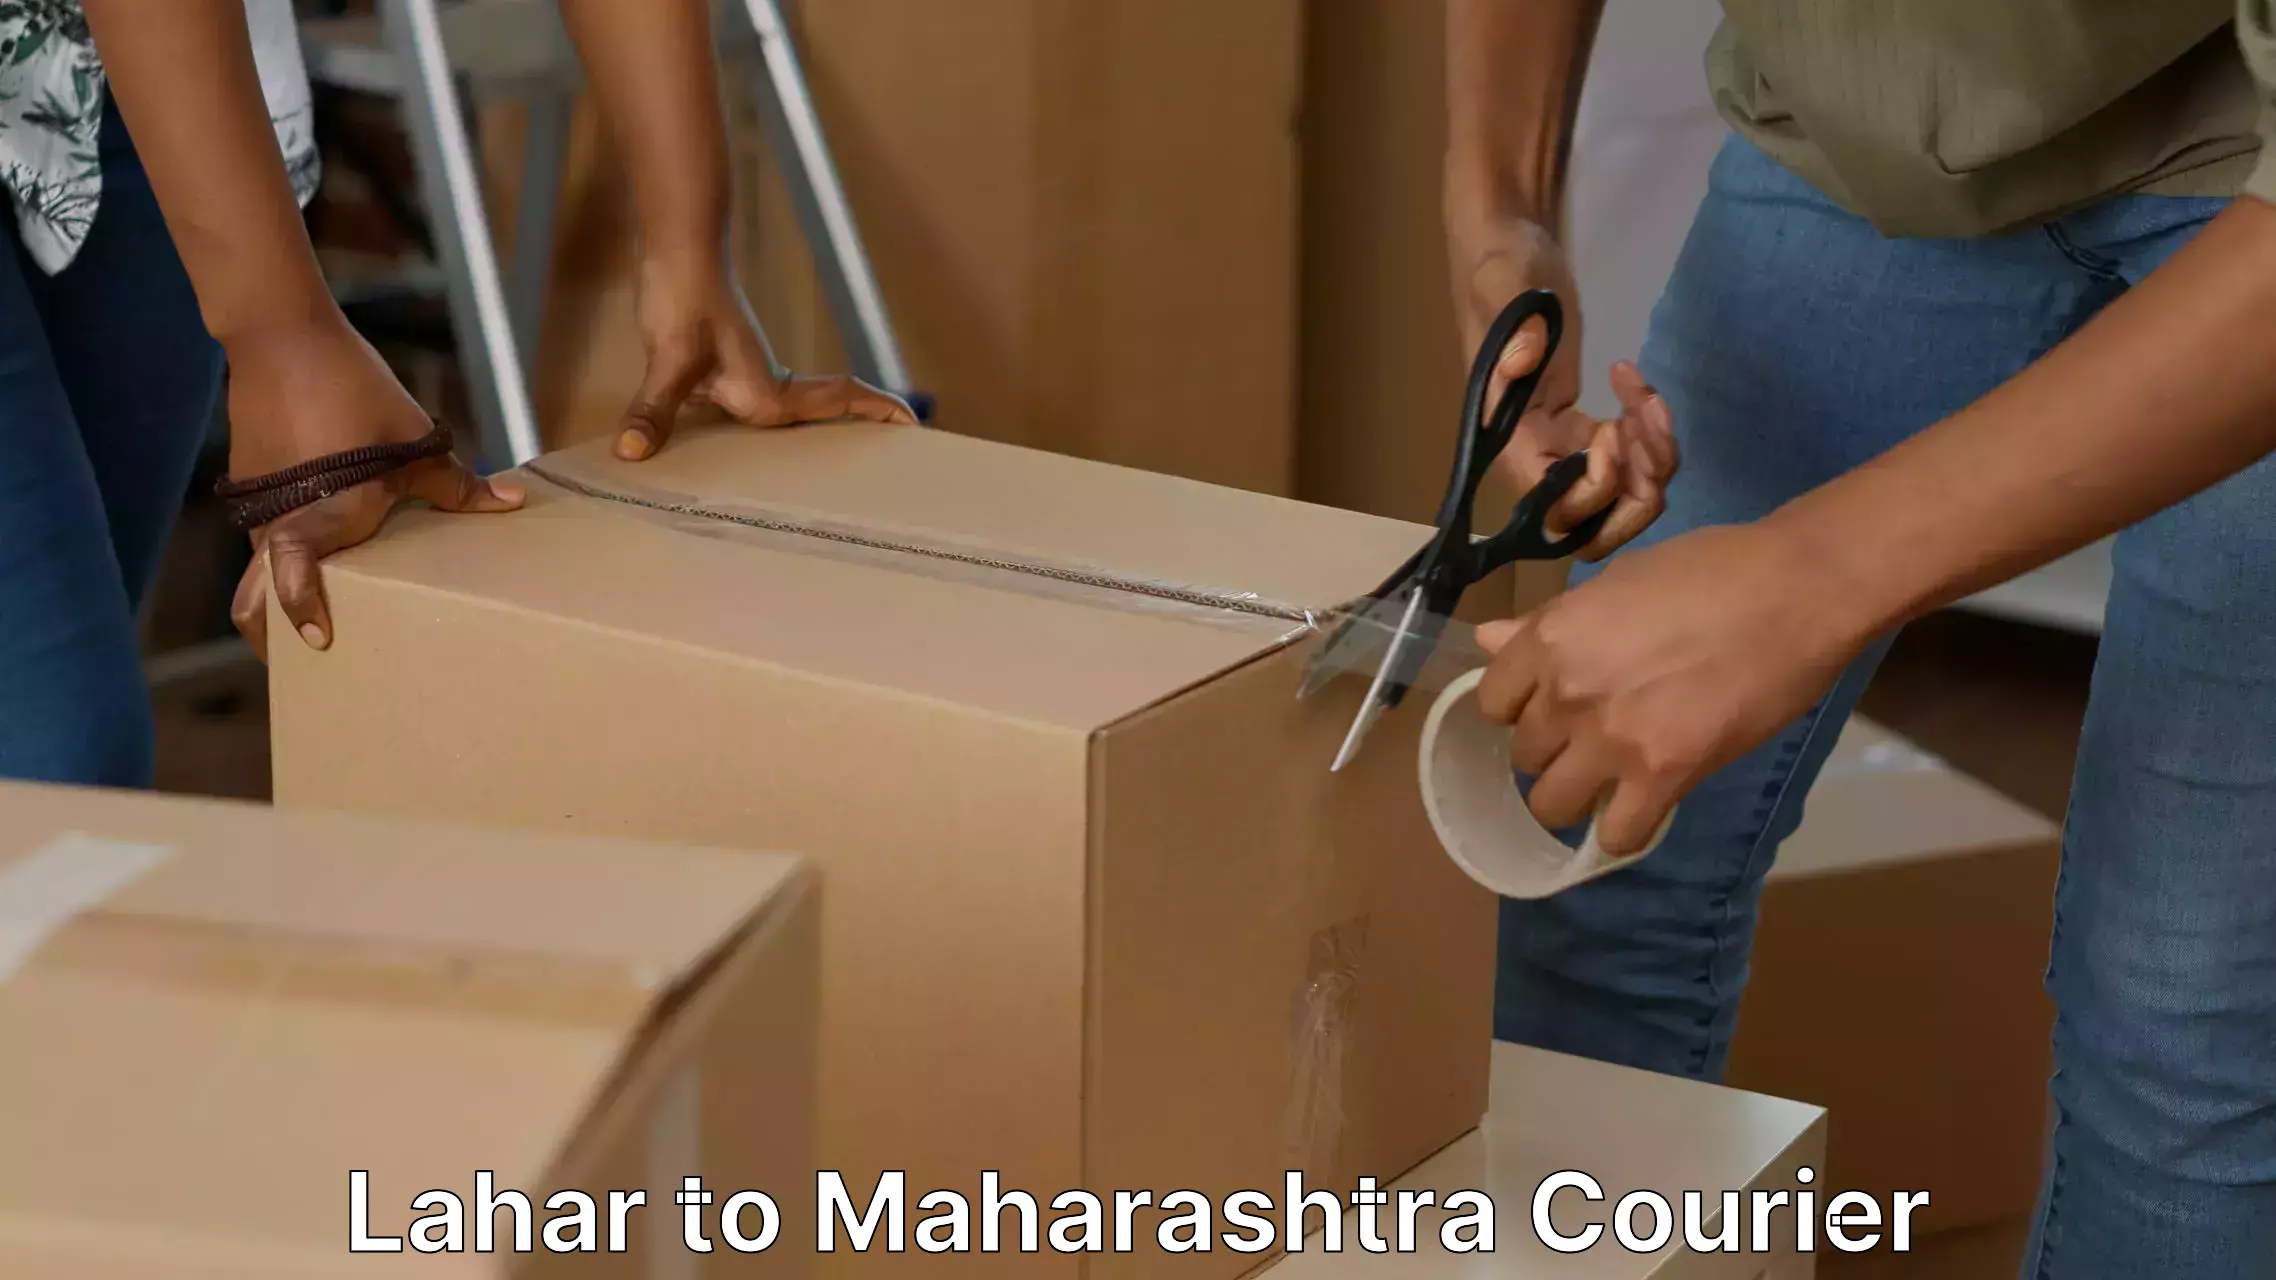 Furniture moving assistance Lahar to Vasai